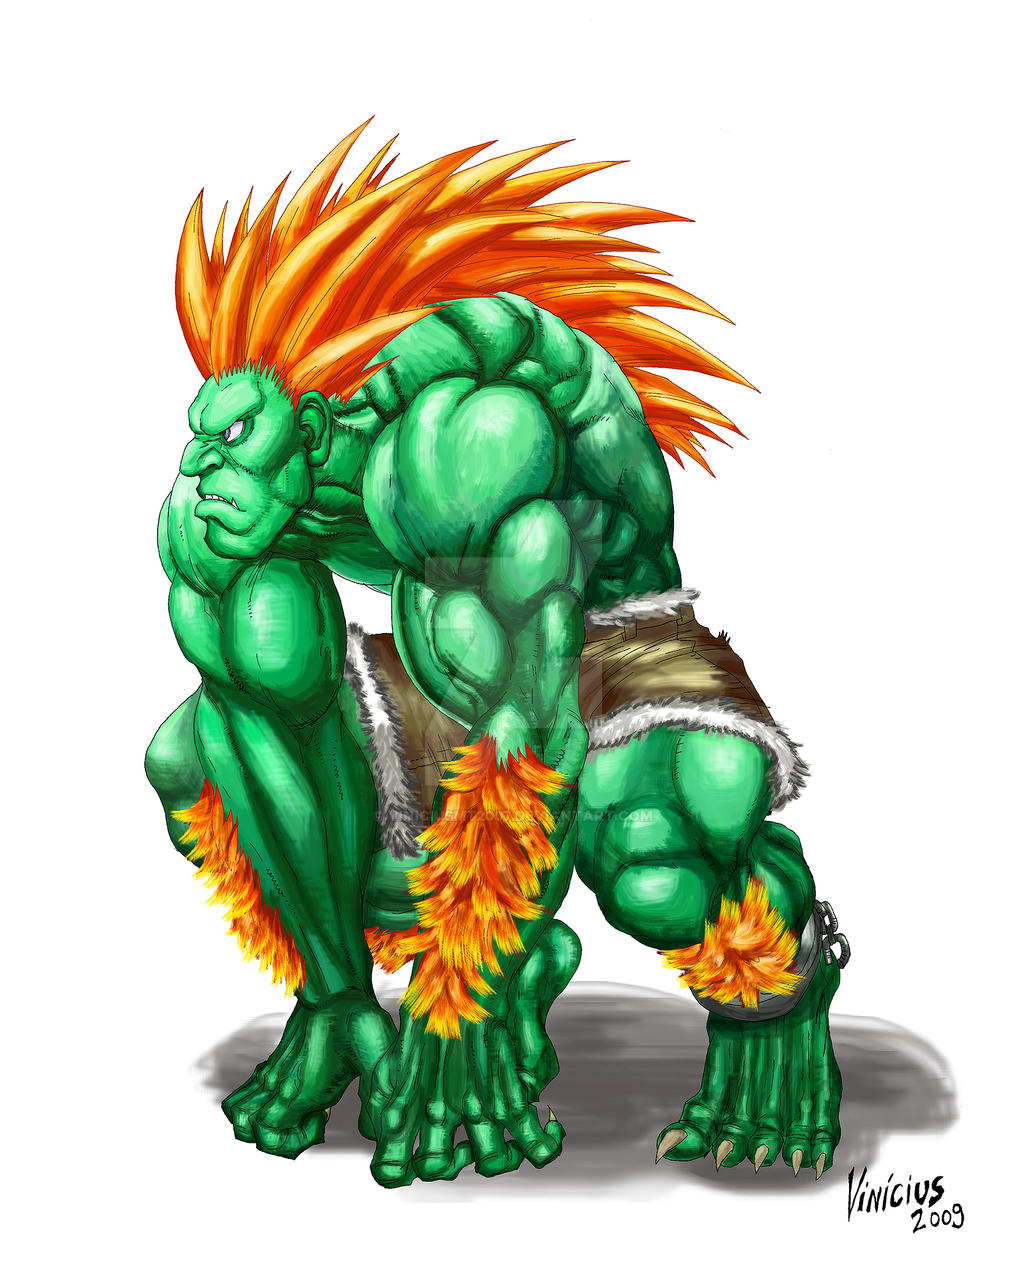 Blanka (Street Fighter)  Street fighter, Street fighter characters, Super street  fighter